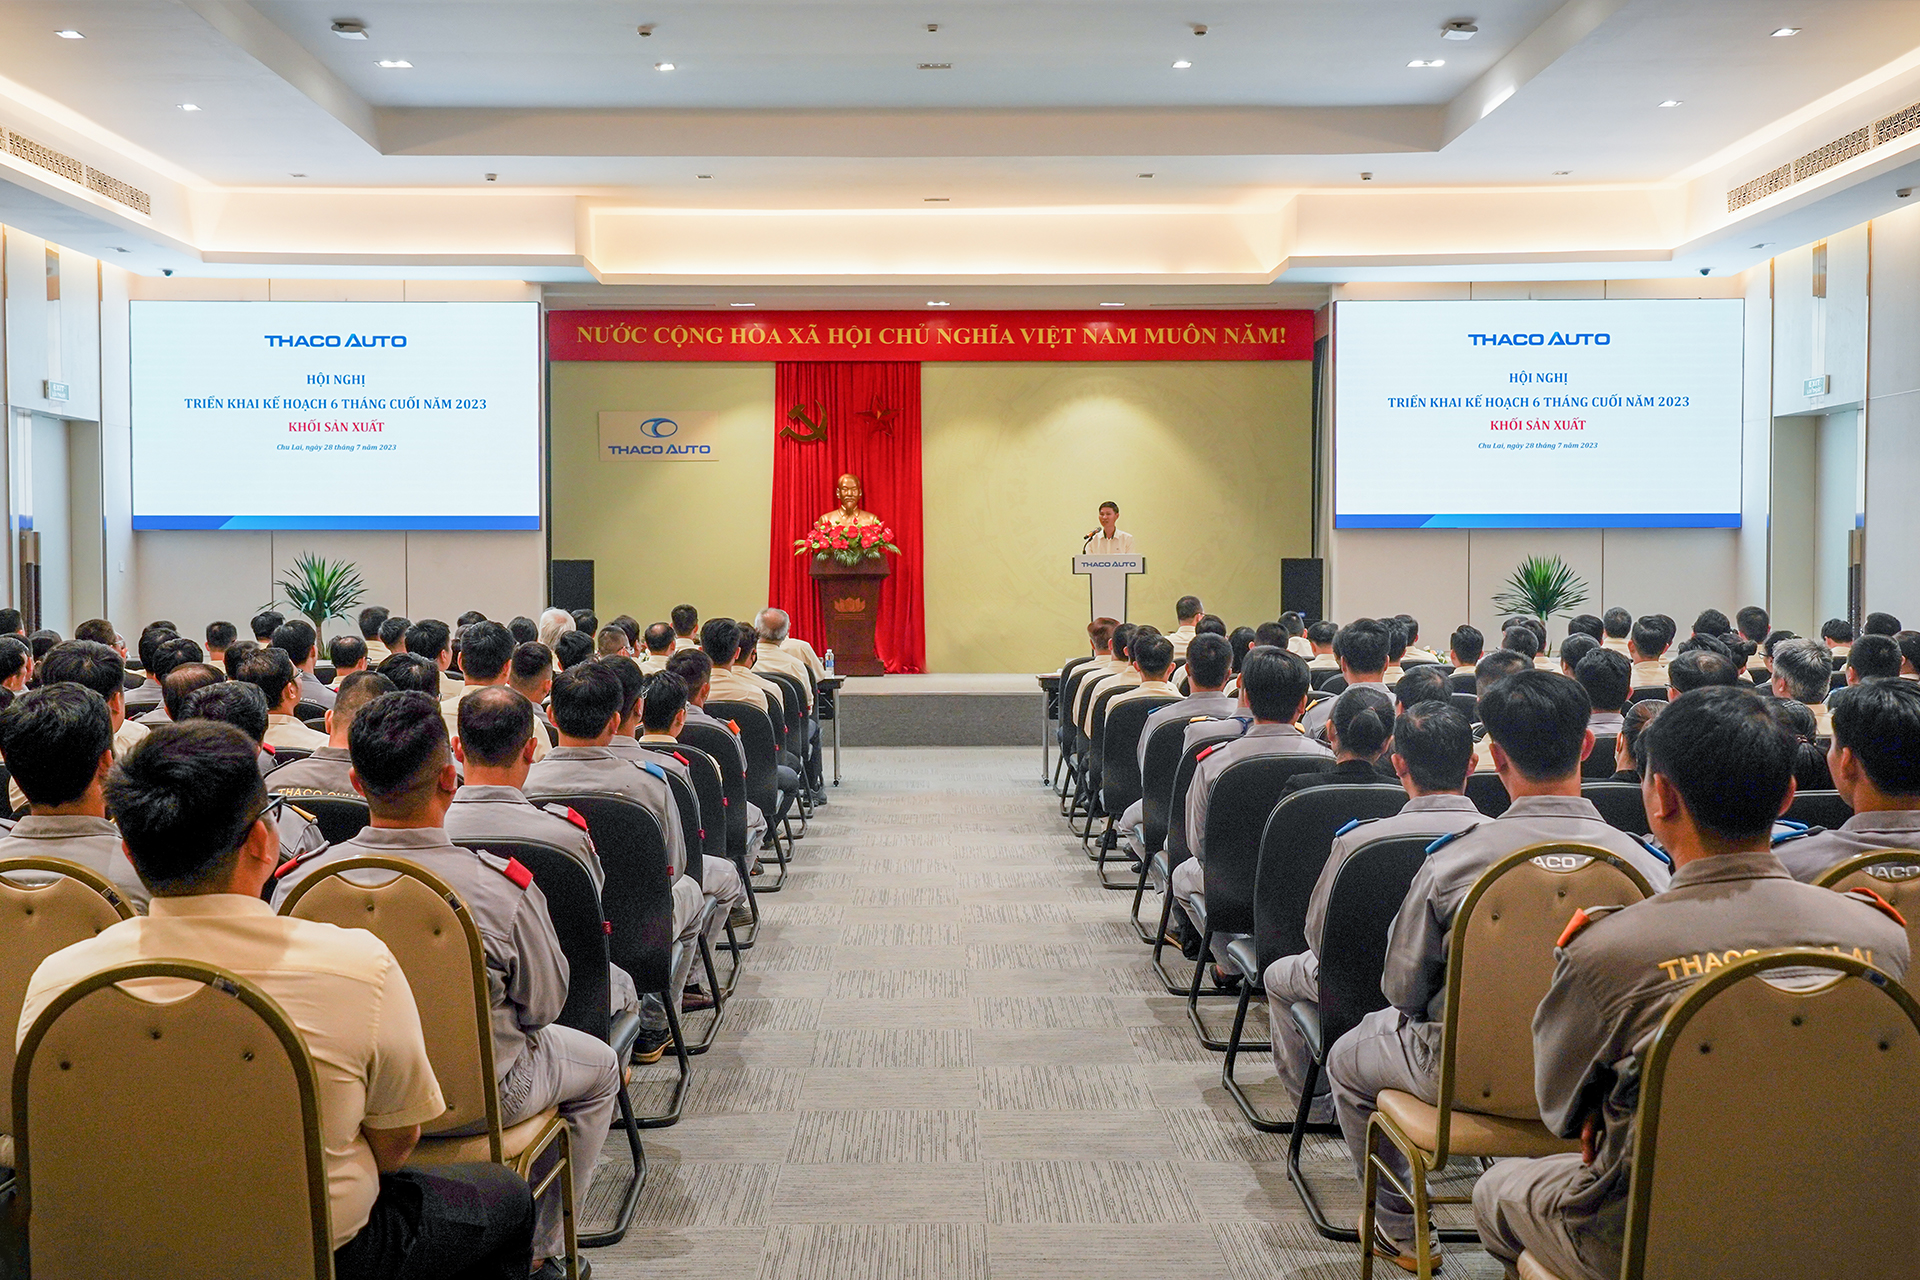 THACO AUTO Production Division holds business plan conference for second half of 2023